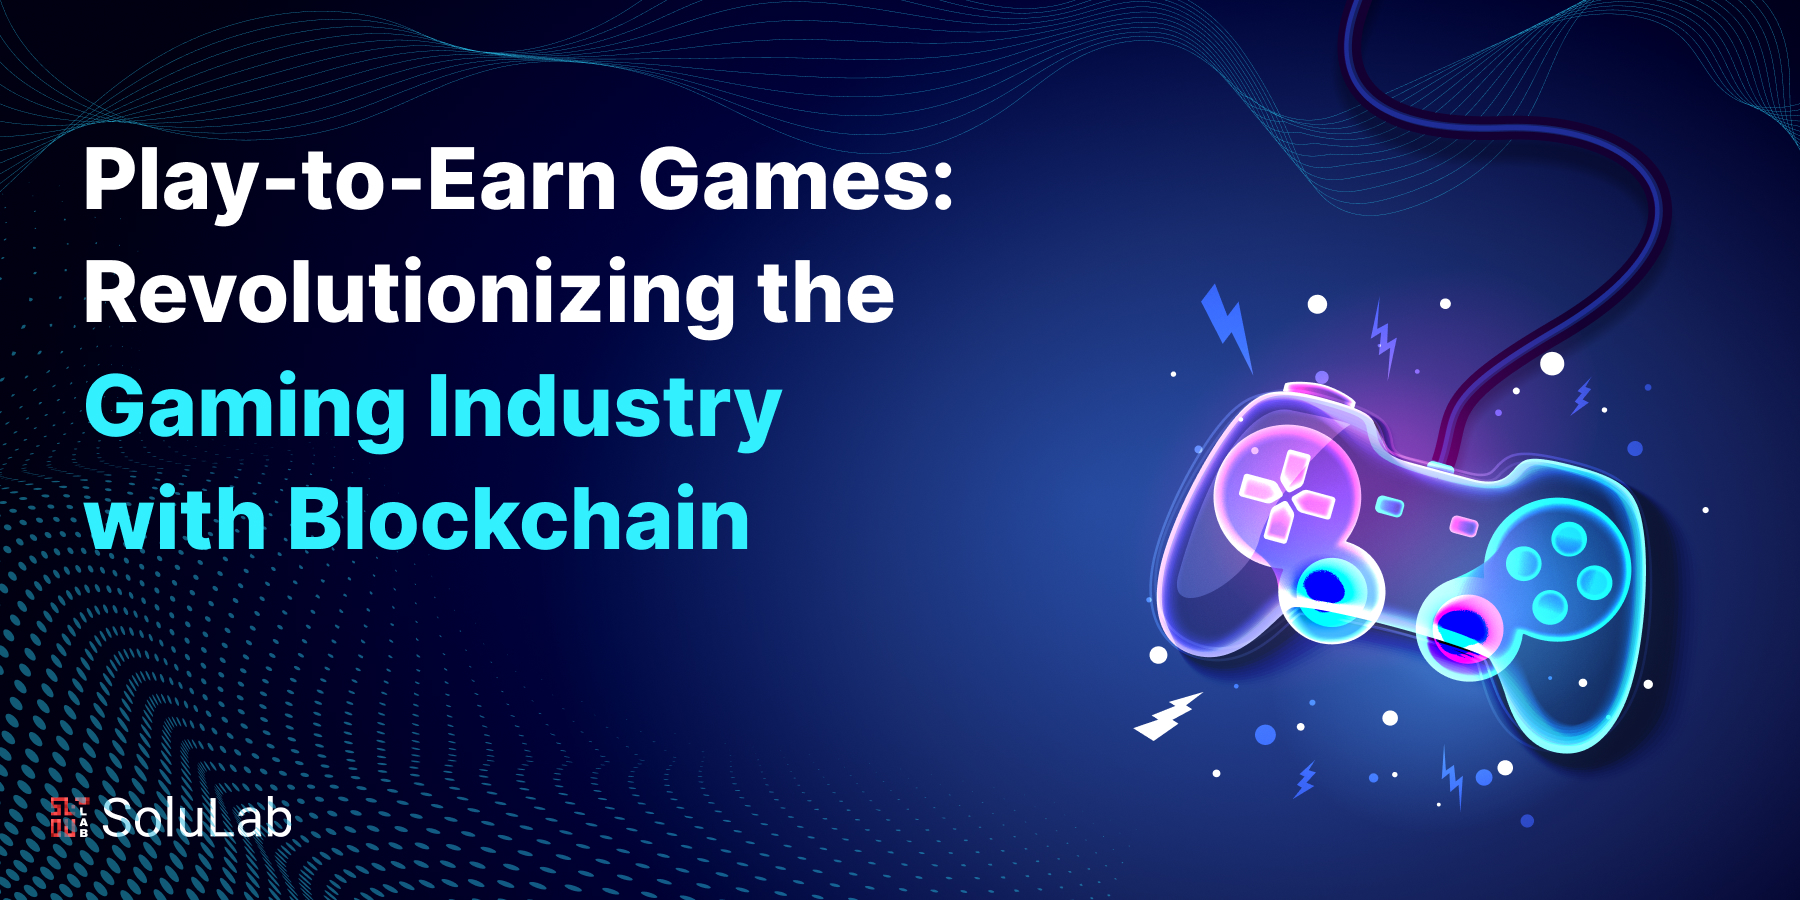 Play-to-Earn Games: Revolutionizing the Gaming Industry with Blockchain